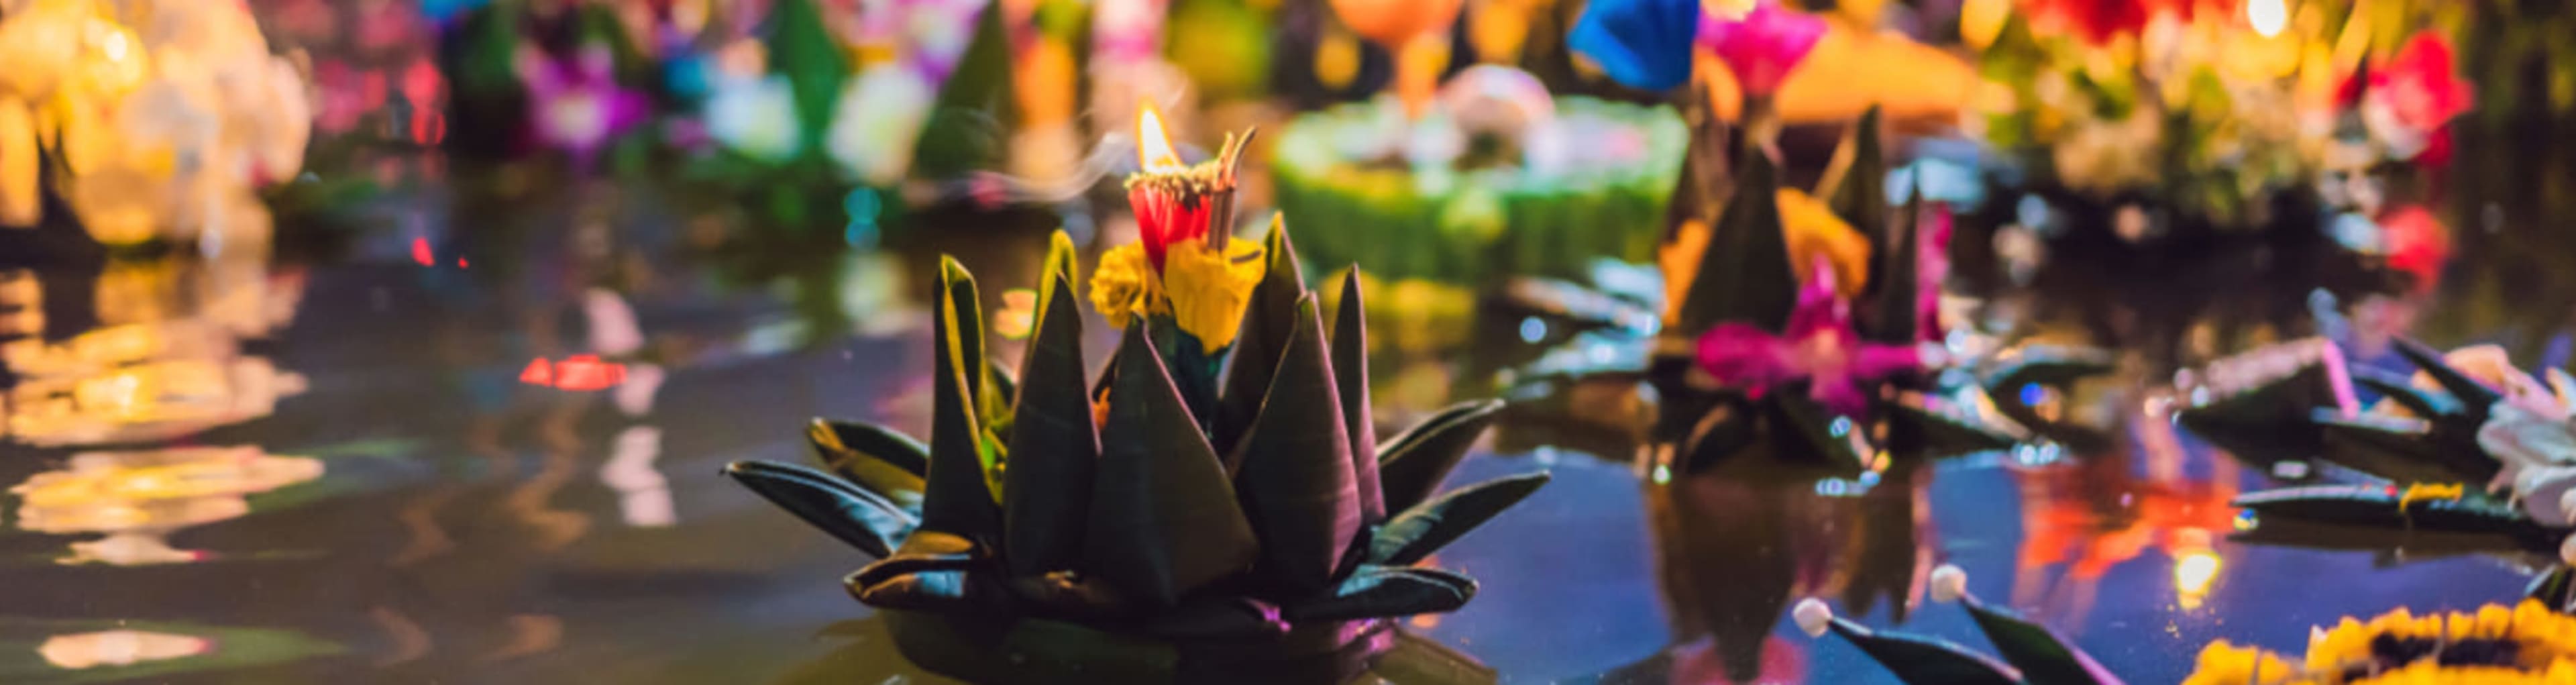 Lotus boats on the water for Thailand's annual Loy Krathong festival.